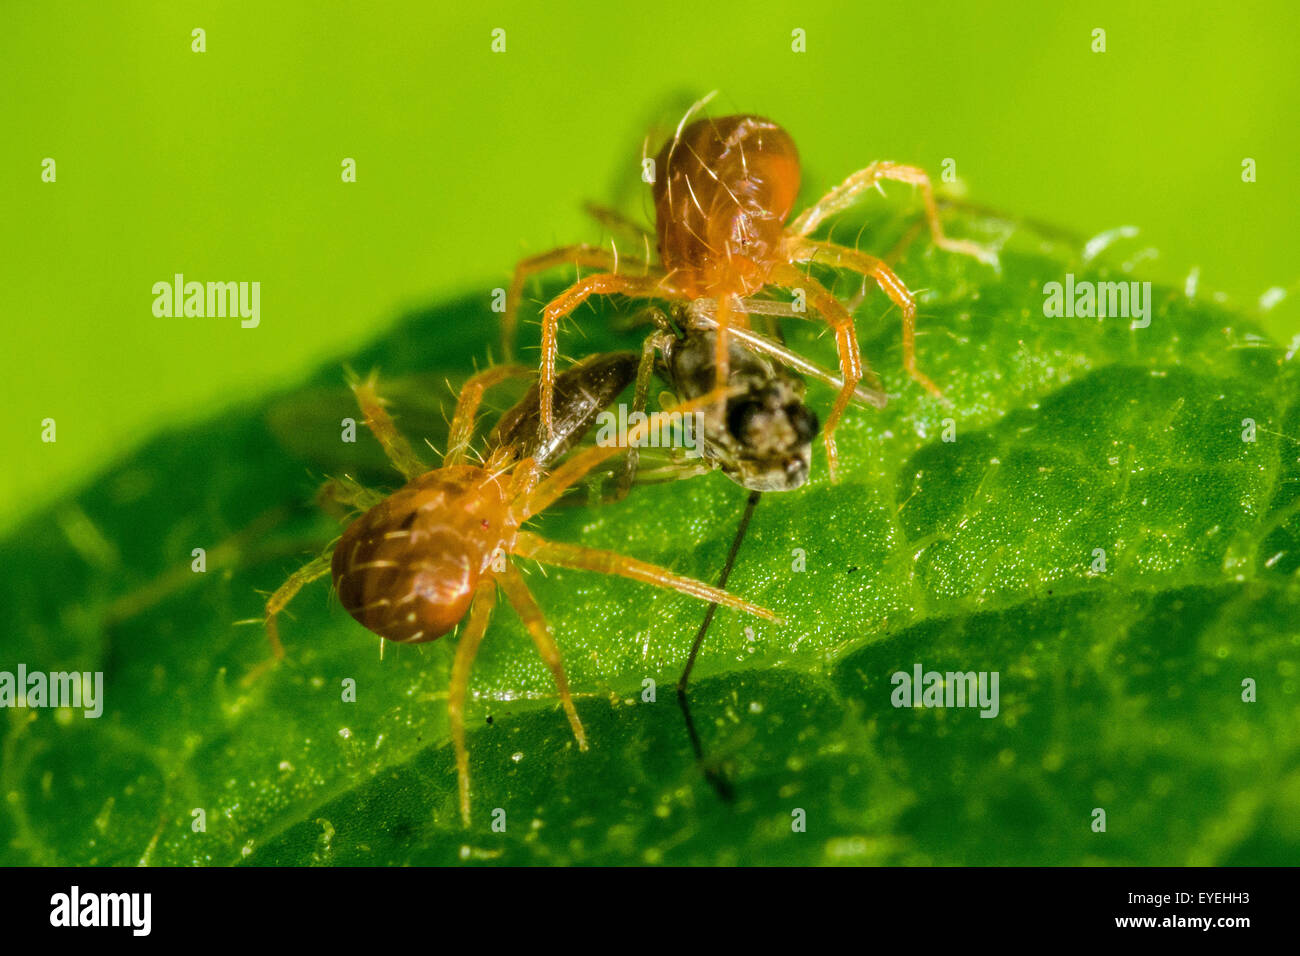 A pair of predatory mites feed on a dead insect. Stock Photo